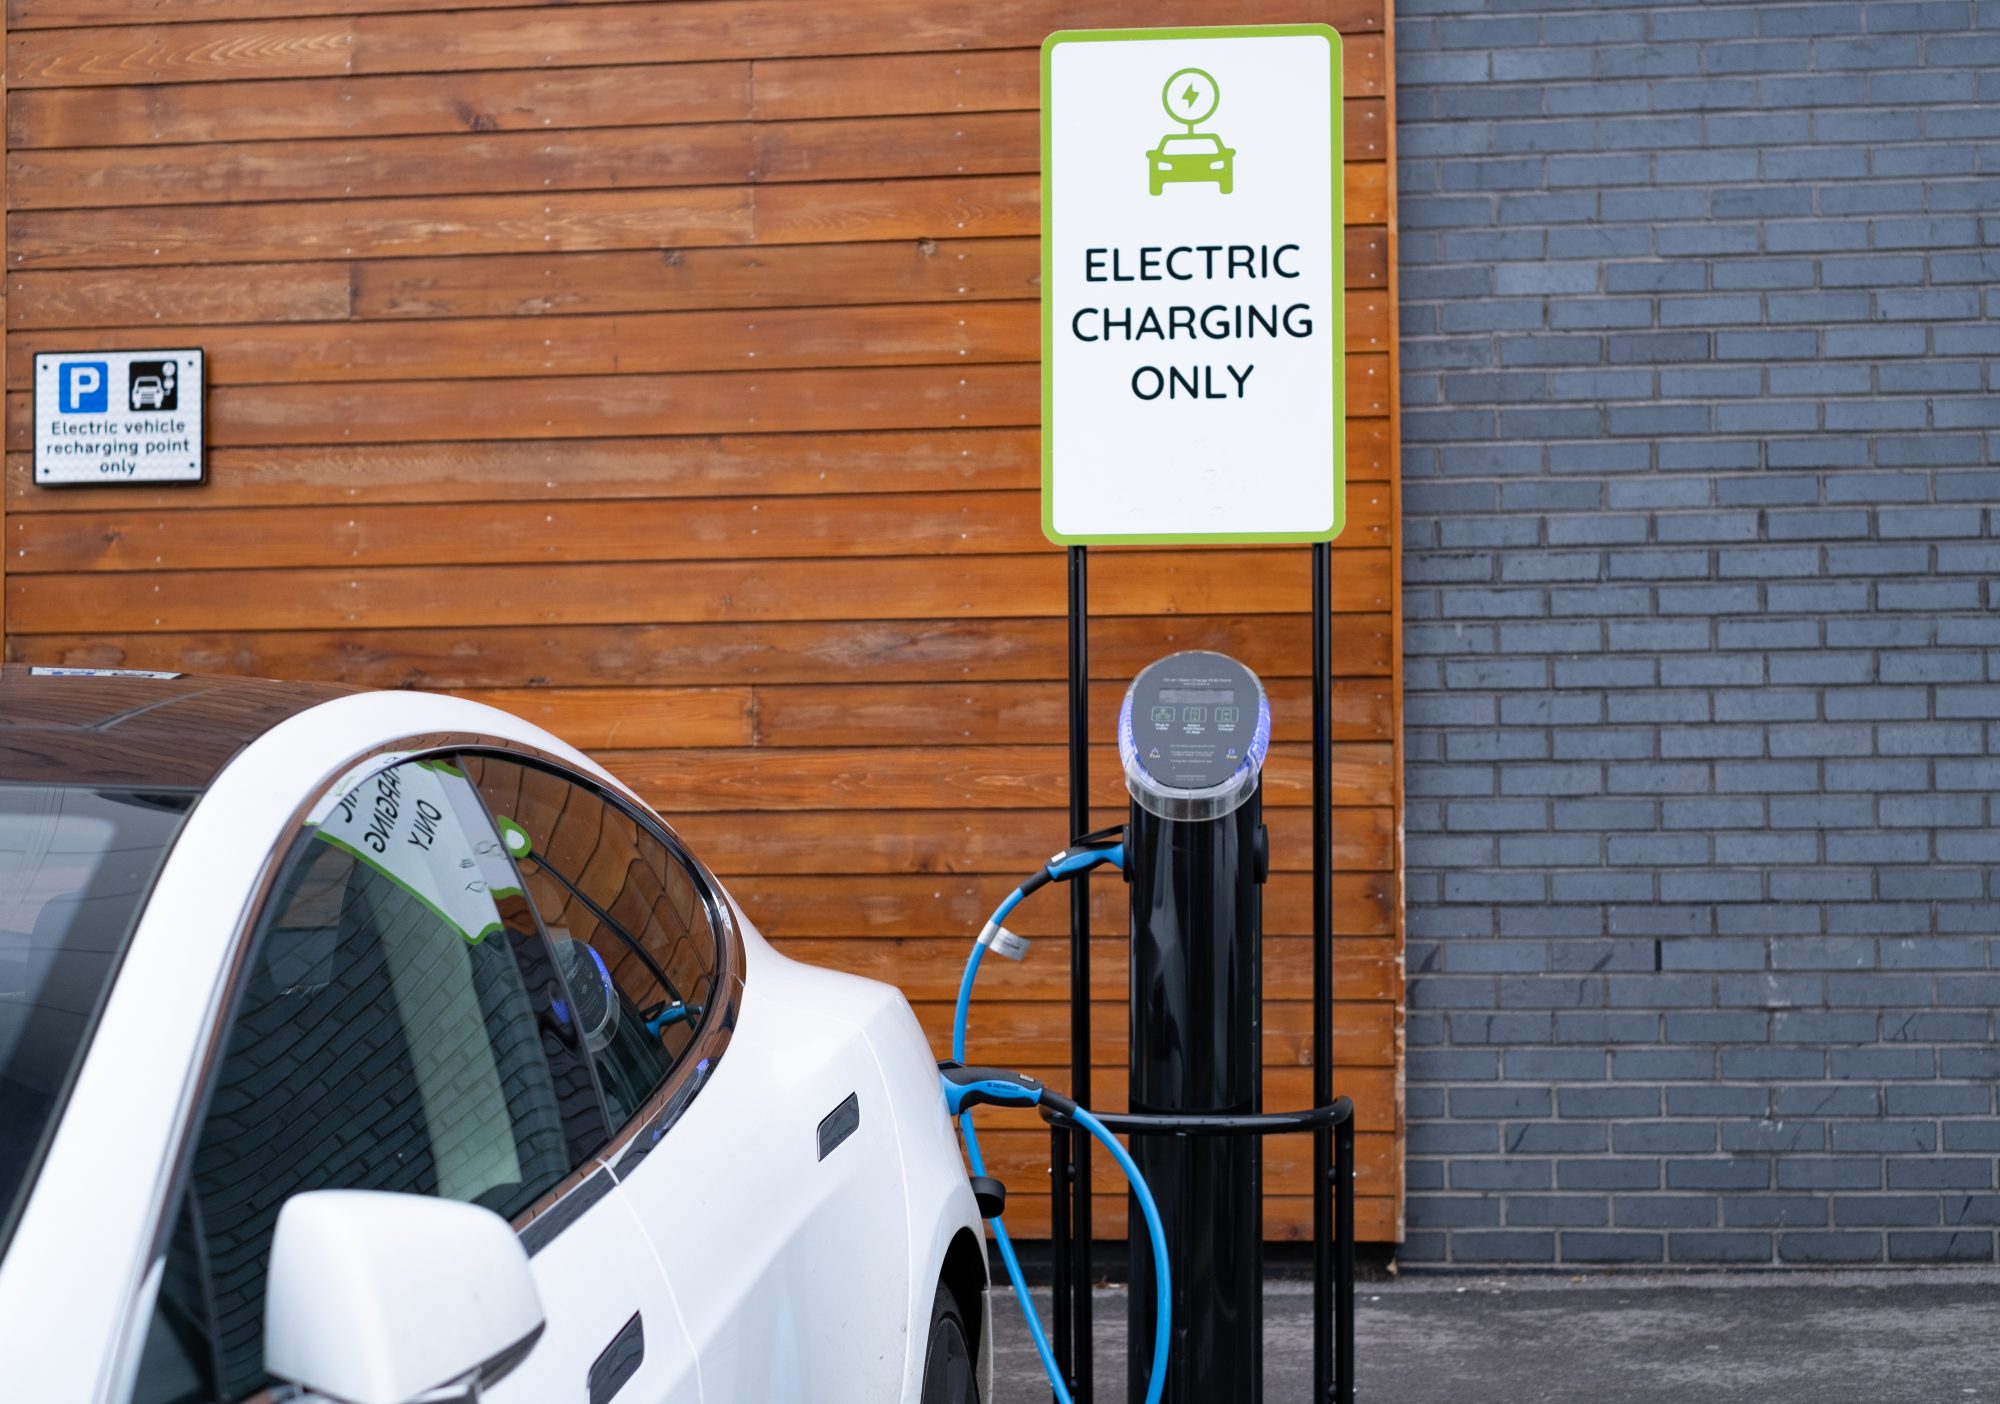 EQUANS to deliver 600 electric vehicle charging points across the UK